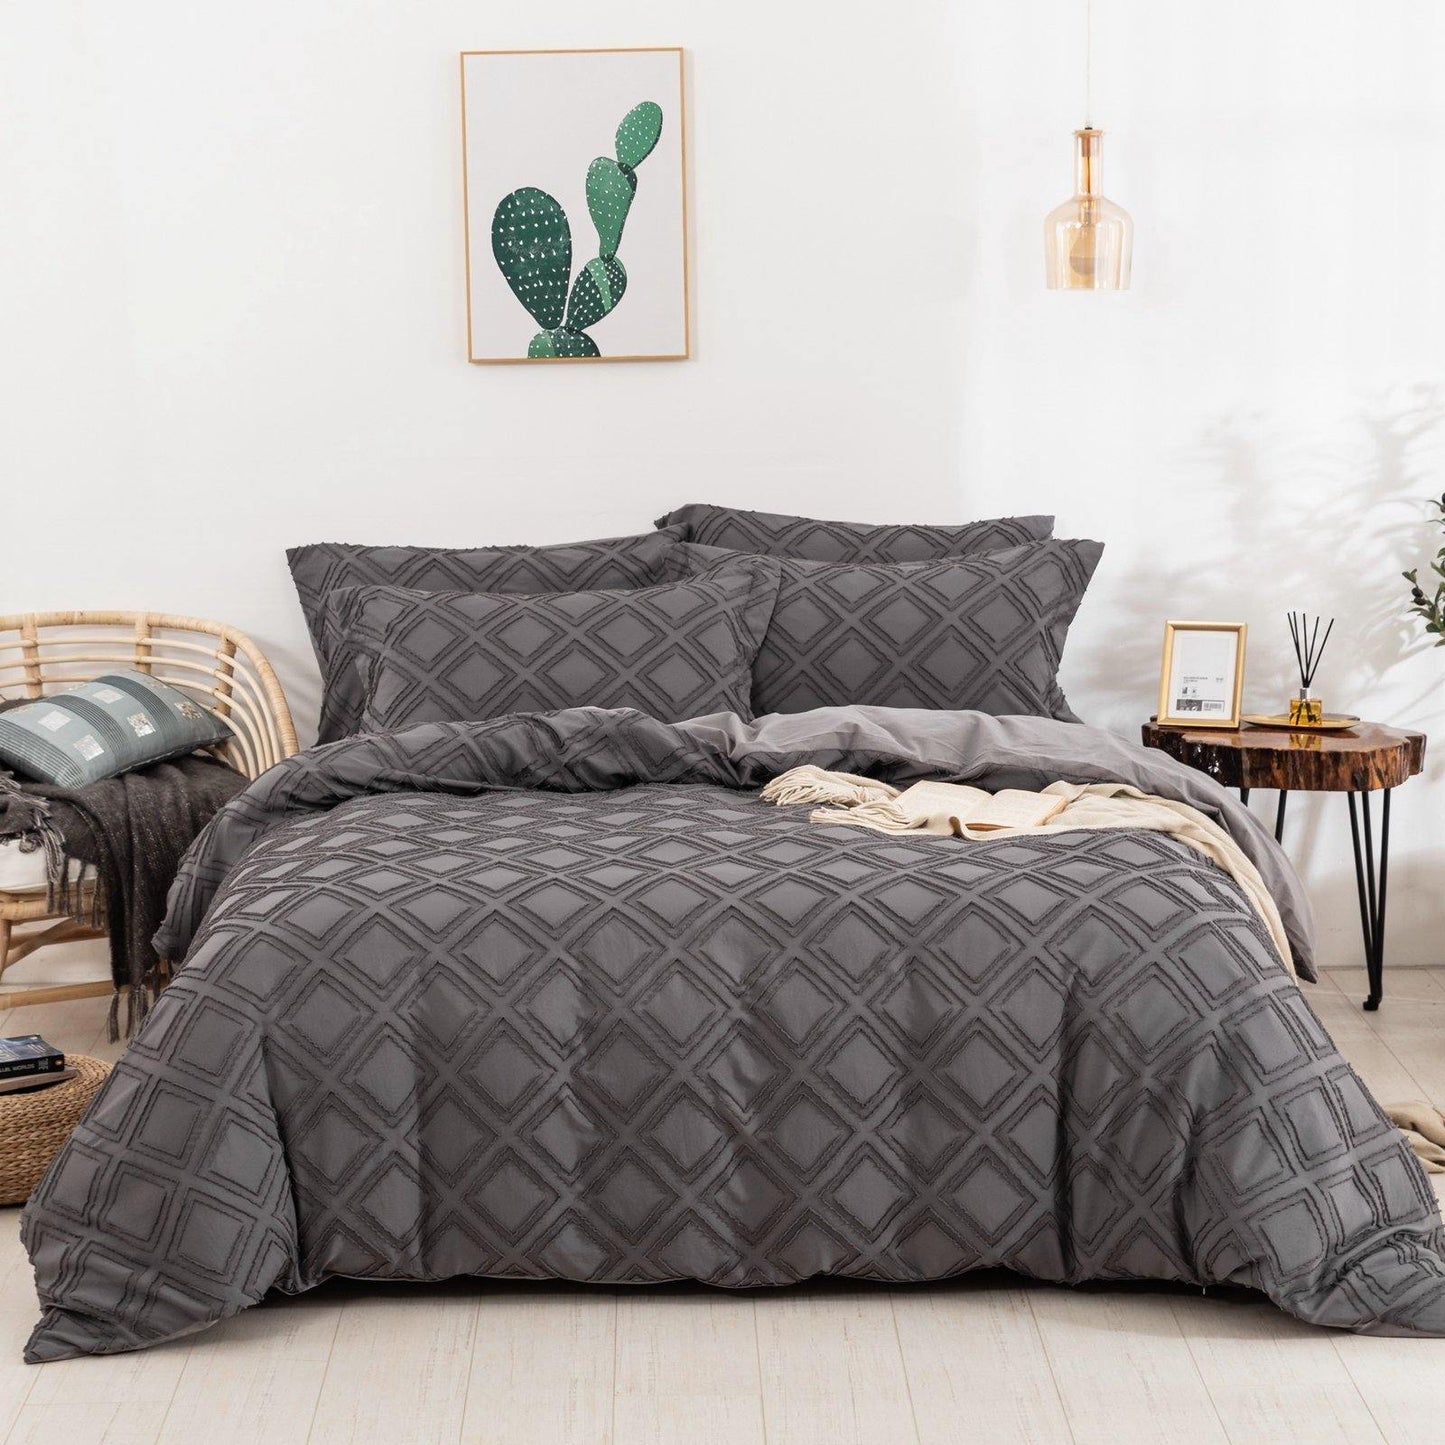 WONGS BEDDING 100% cotton gray black chocolate block Comforter set 3 Pieces Bedding Comforter with 2 Pillow Cases suitable for the whole season - Wongs bedding